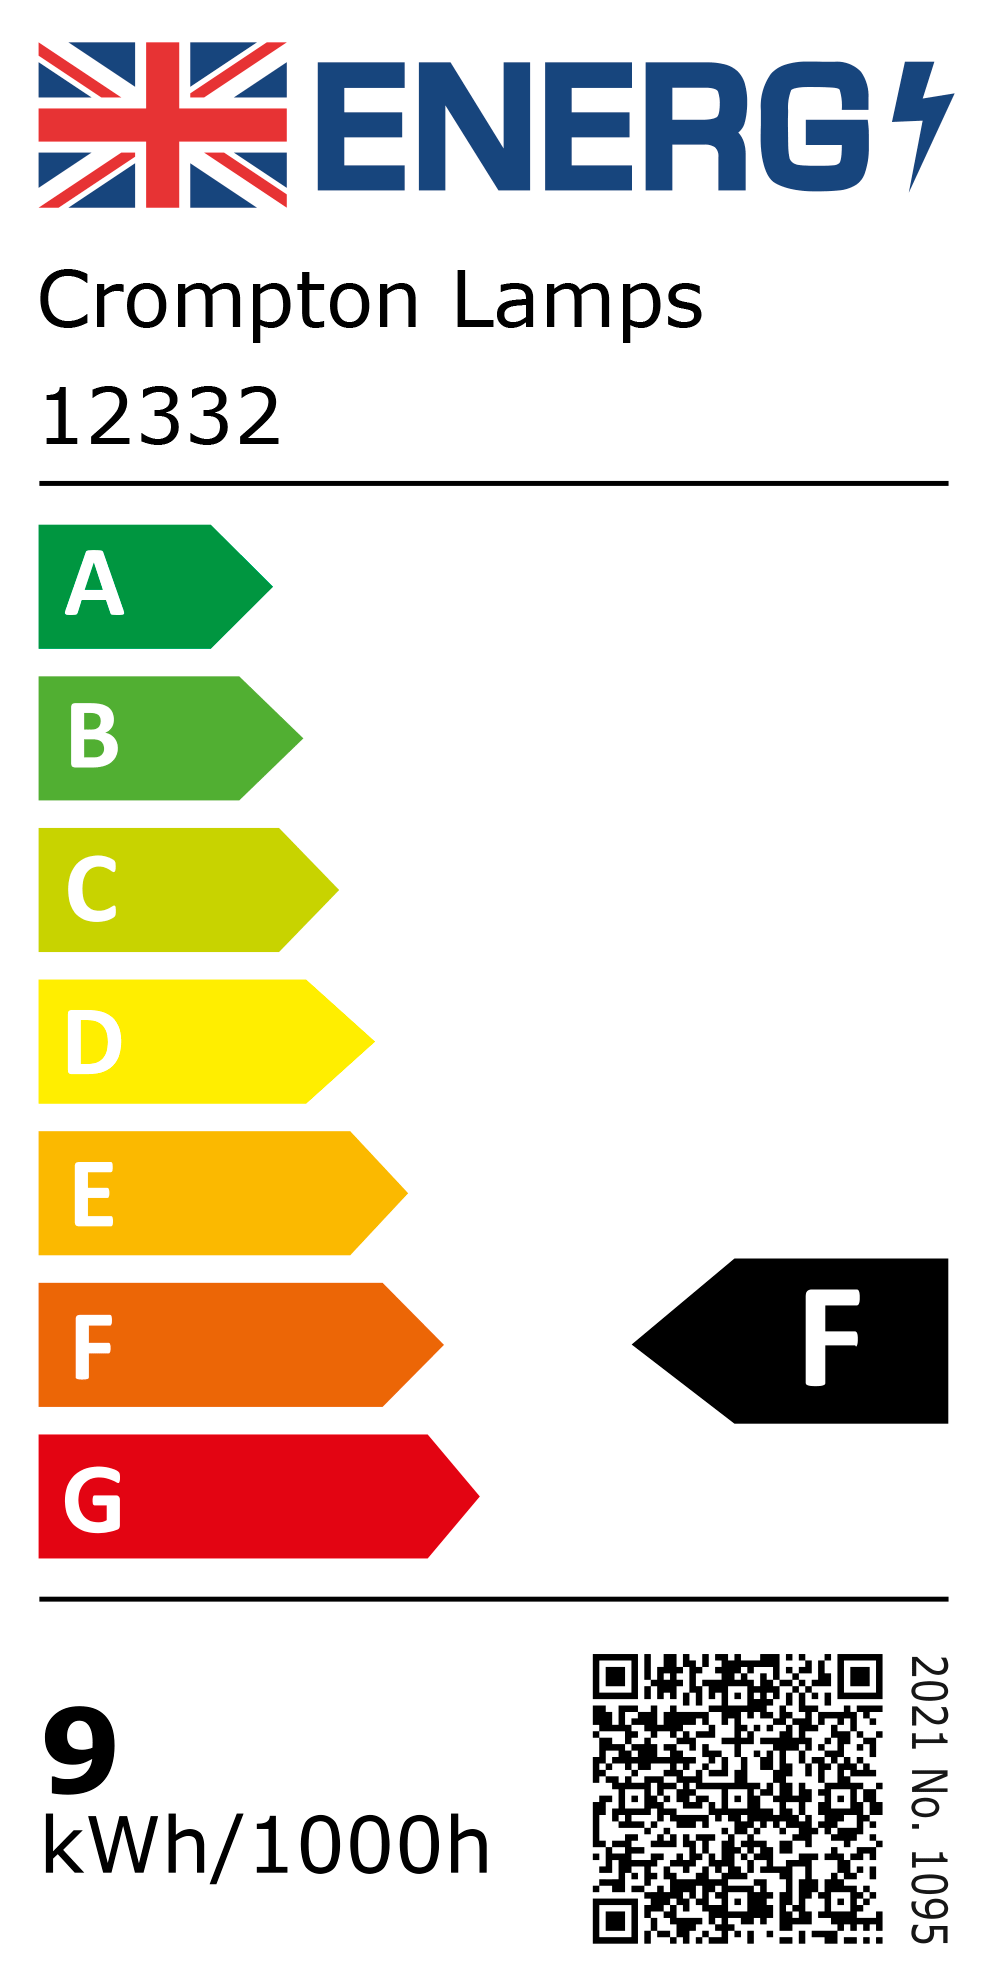 New 2021 Energy Rating Label: Stock Code 12332